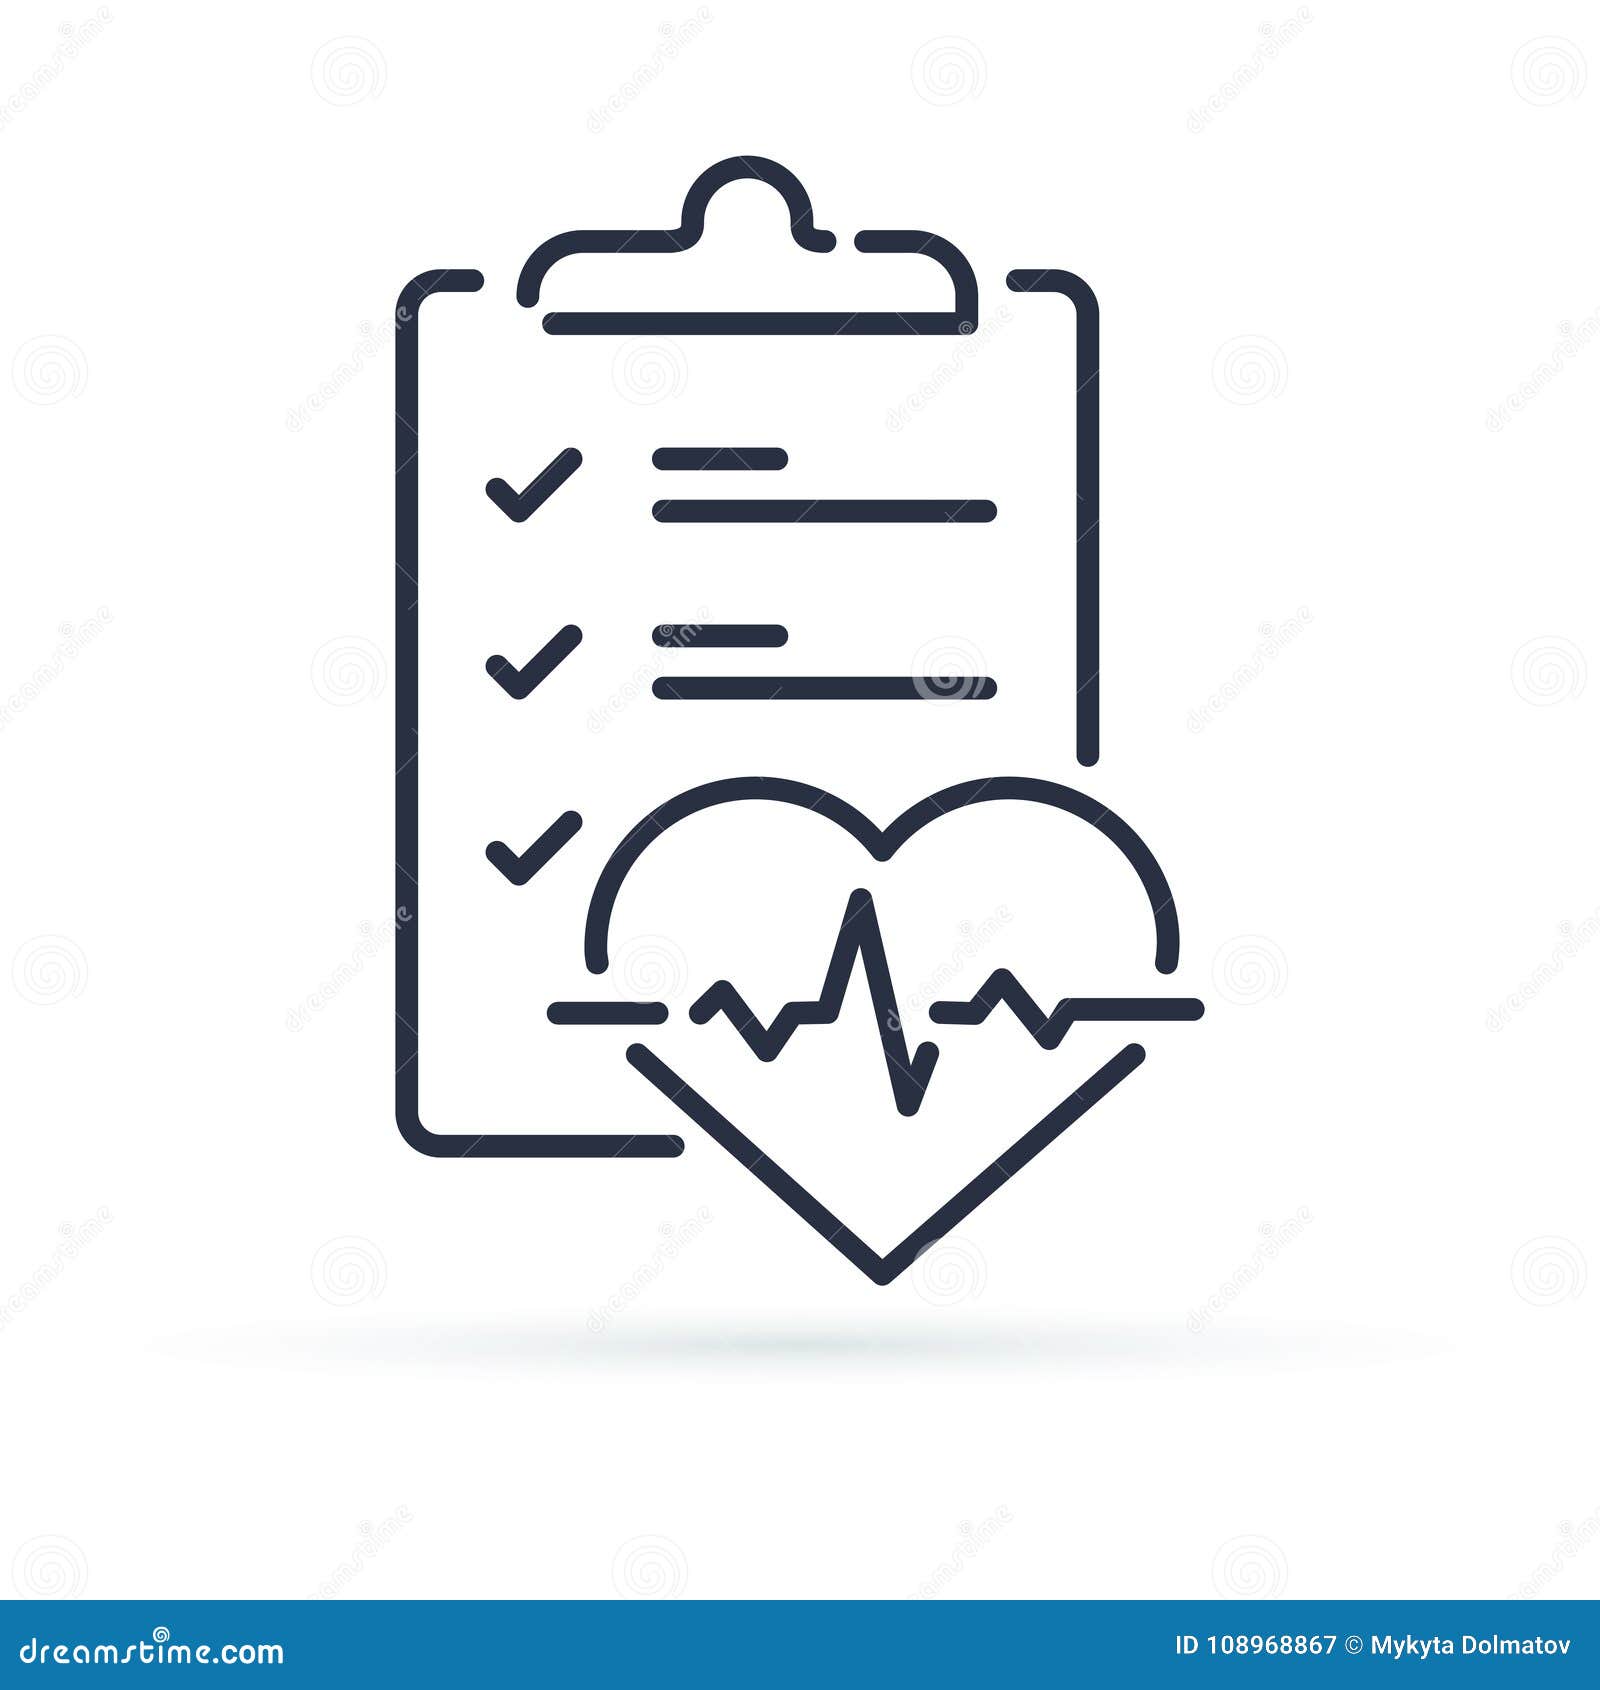 health check up checklist for cardiovascular disease prevention test. heart diagnostic electrocardiography service